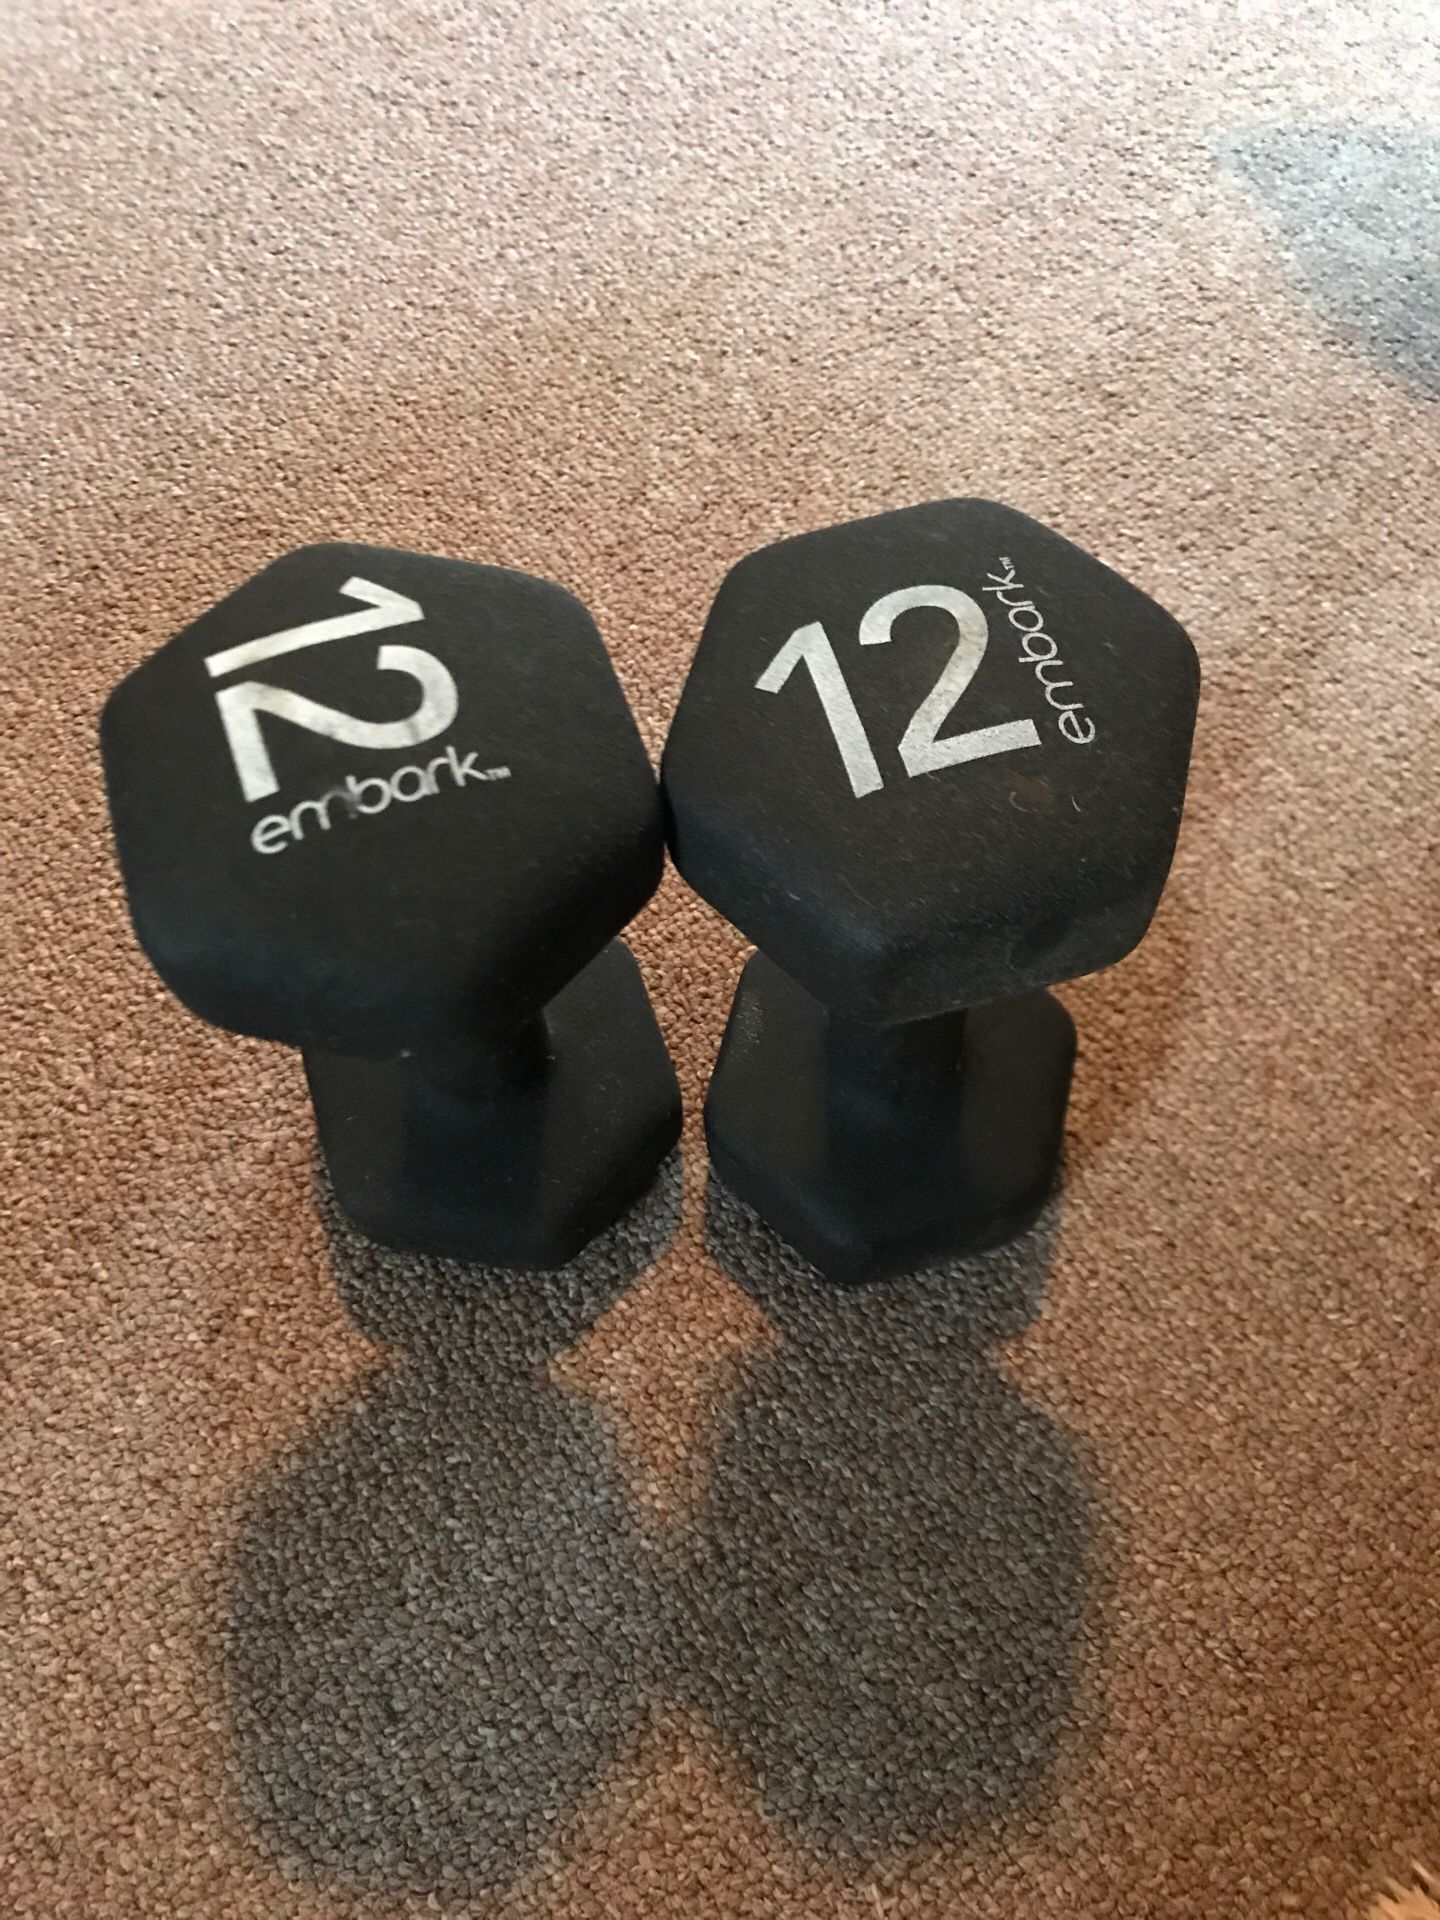 NEOPRENE 12 POUNDS WEIGHTS DUMBELL